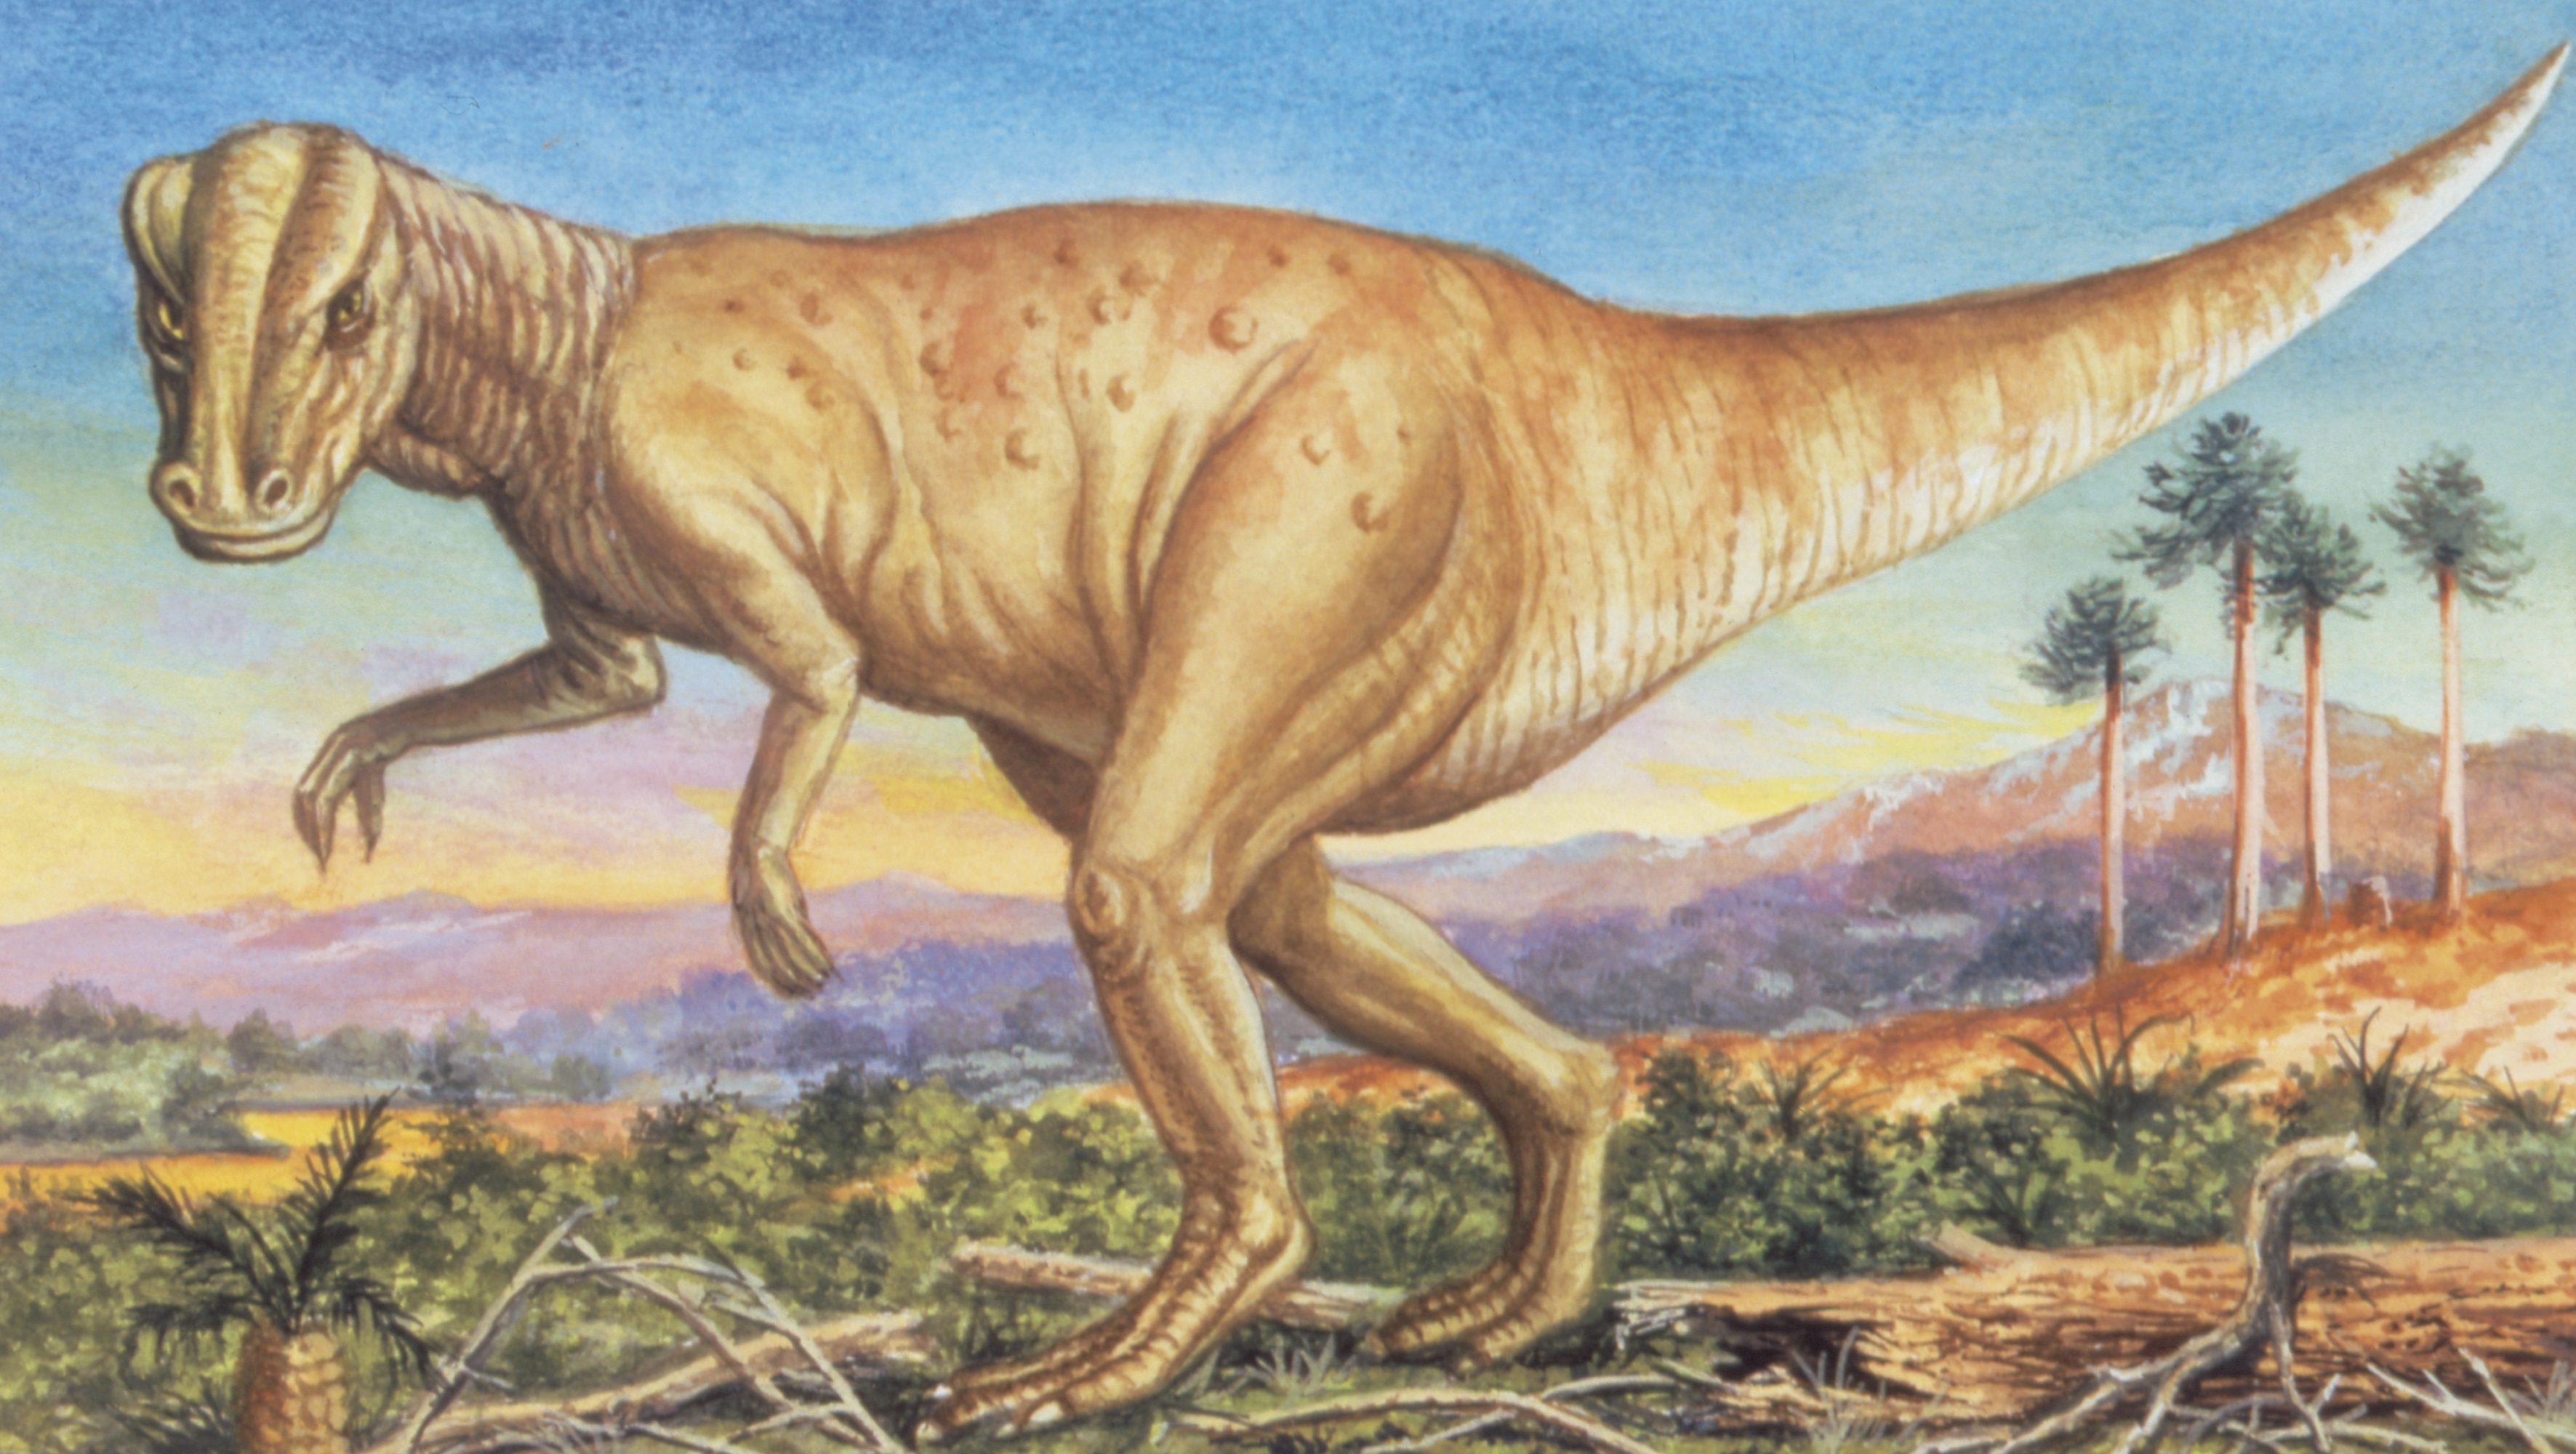 New dinosaur was a plant-eating speed runner